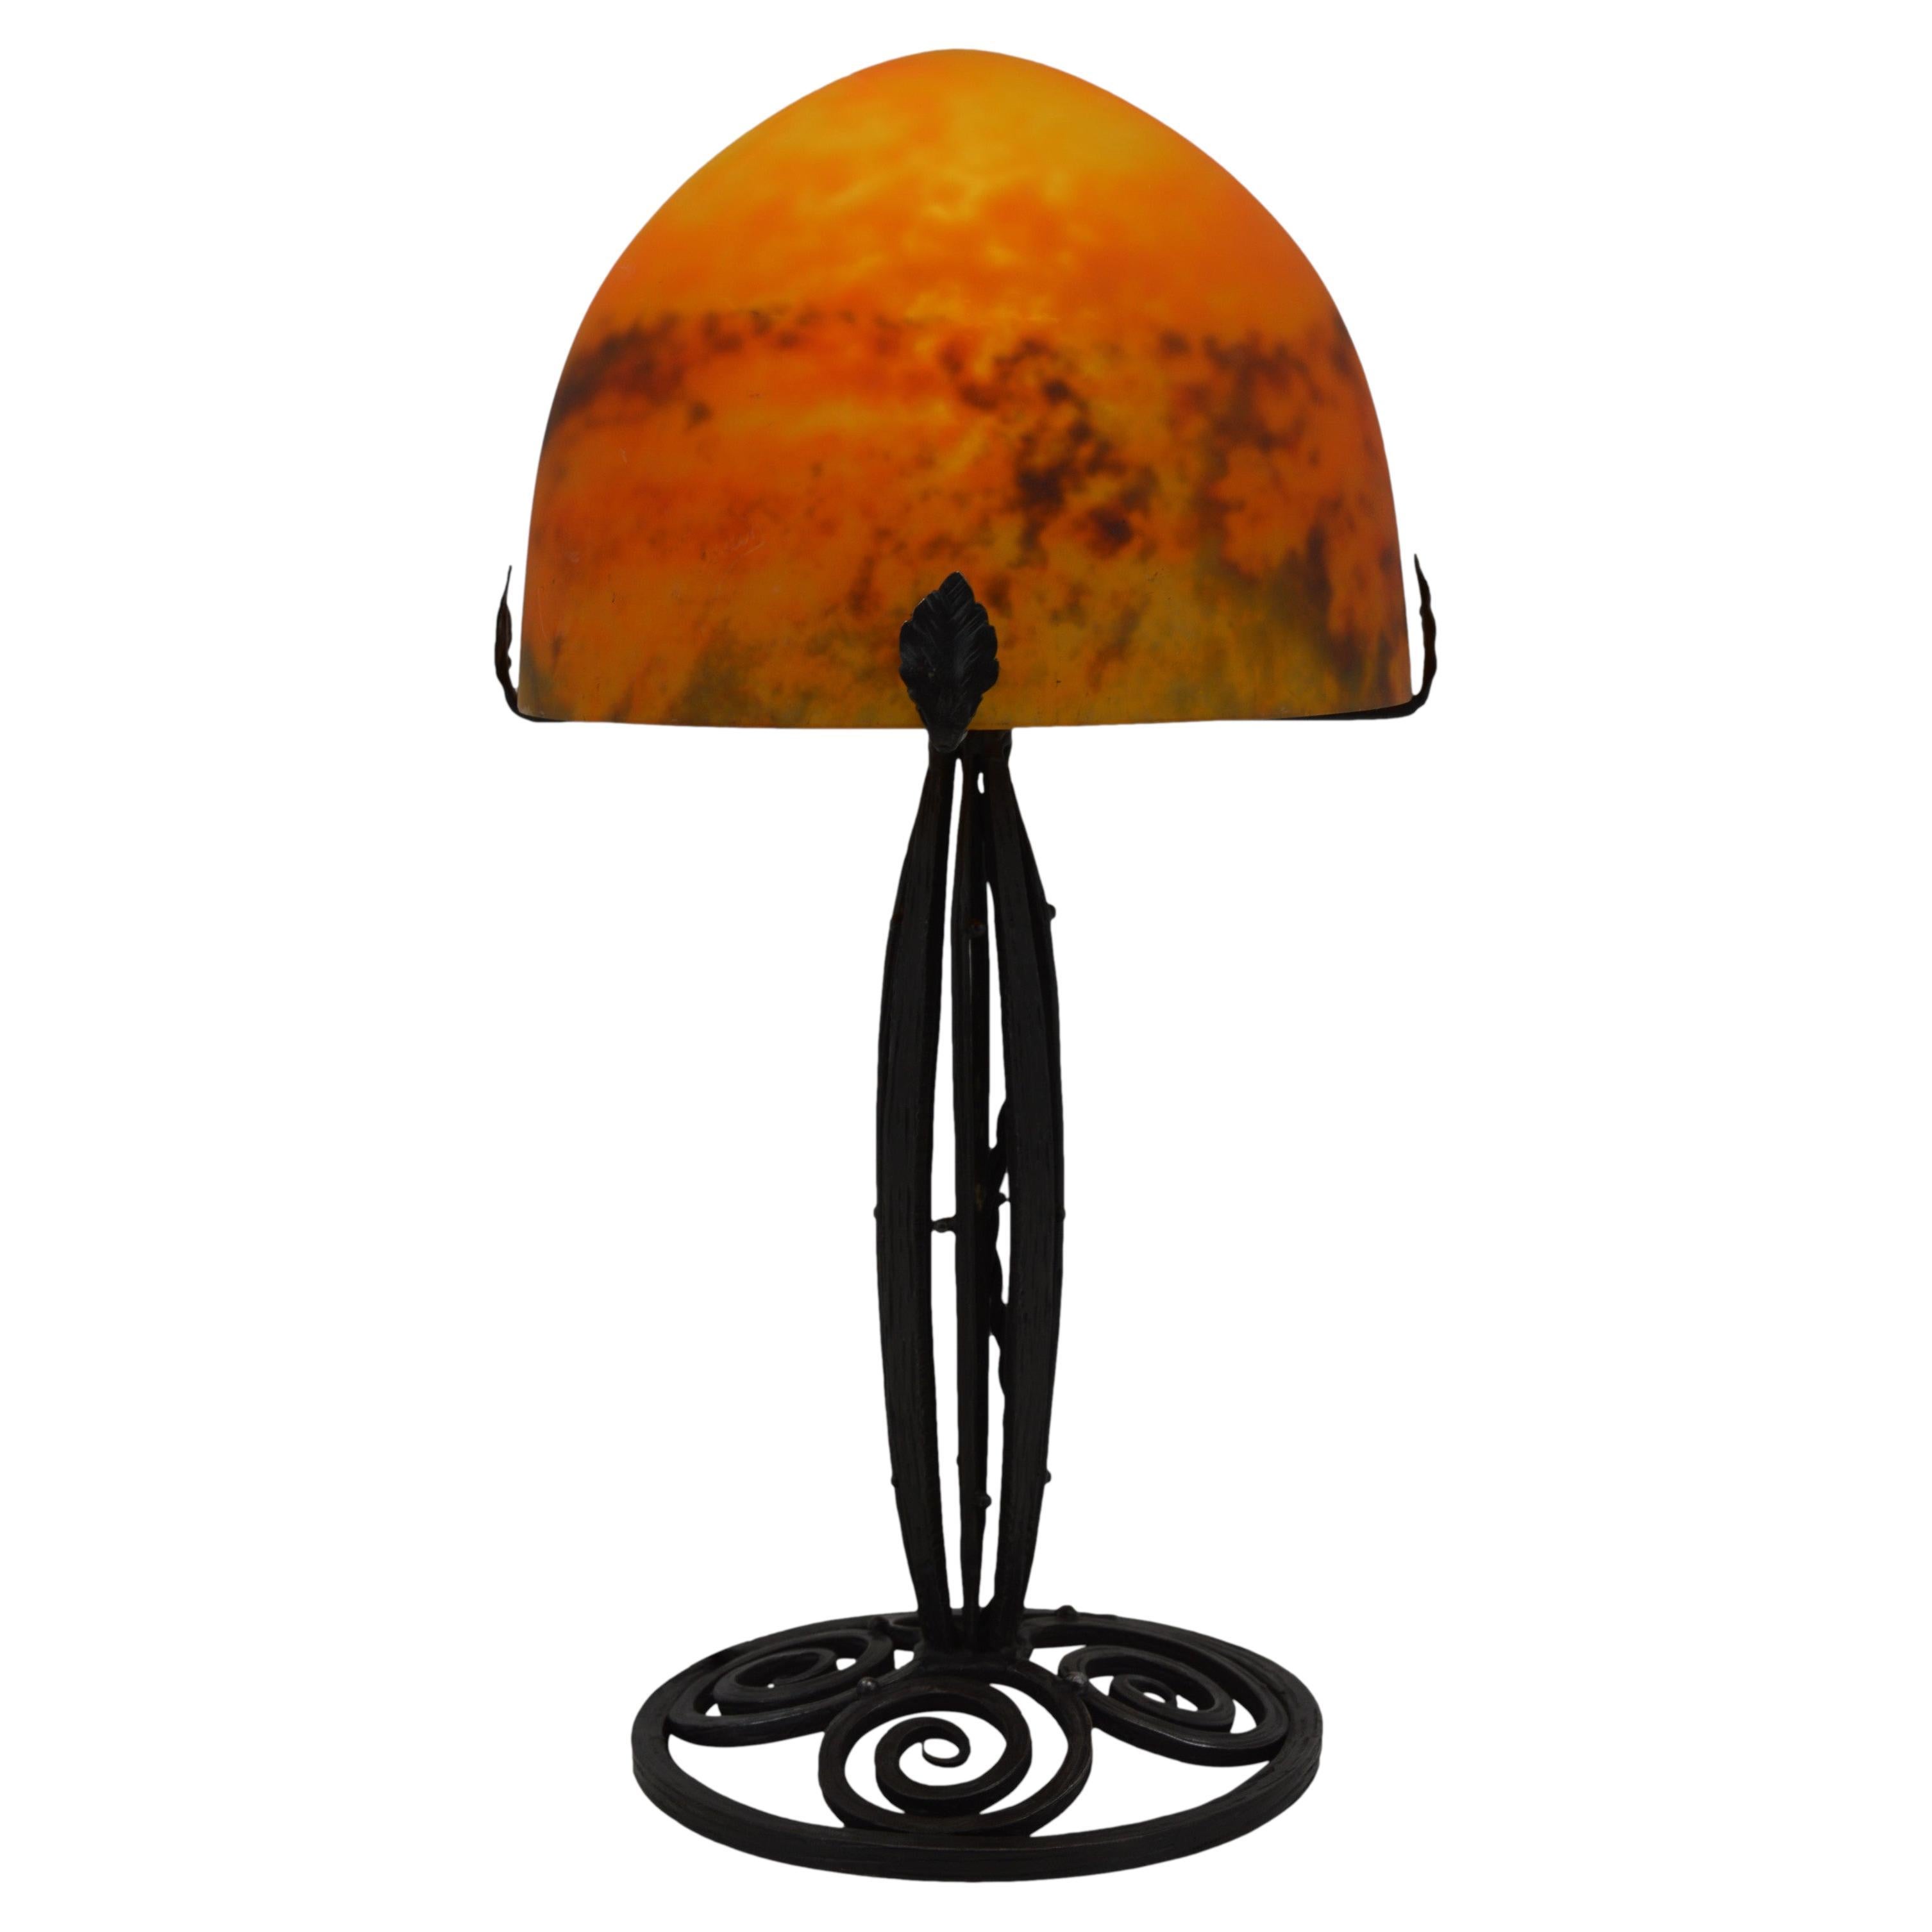 Daum French Art Deco Table Lamp, Late 1920s For Sale